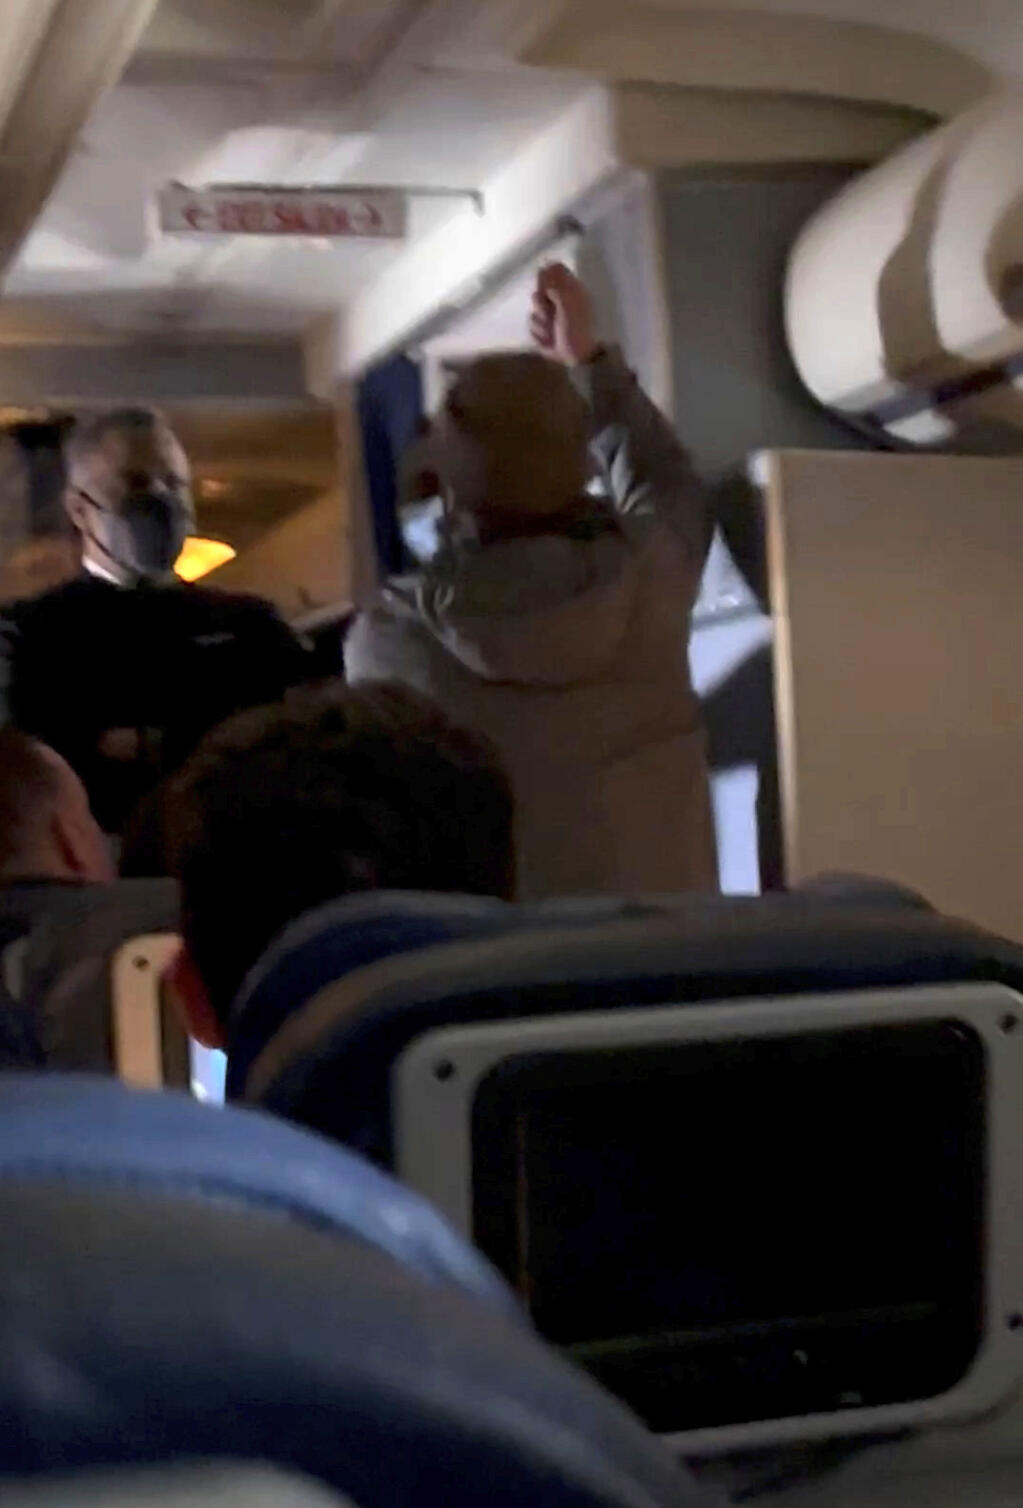 In this still image from video provided by Lisa Olsen, a man, who federal authorities have identified as Francisco Severo Torres, raises his hand before attacking a flight attendant in the cabin of a weekend flight from Los Angeles to Boston, Sunday, March 5, 2023. Federal authorities said Torres tried to open the airliner's emergency exit and then tried to stab a flight attendant with a broken spoon. (Lisa Olsen via AP)